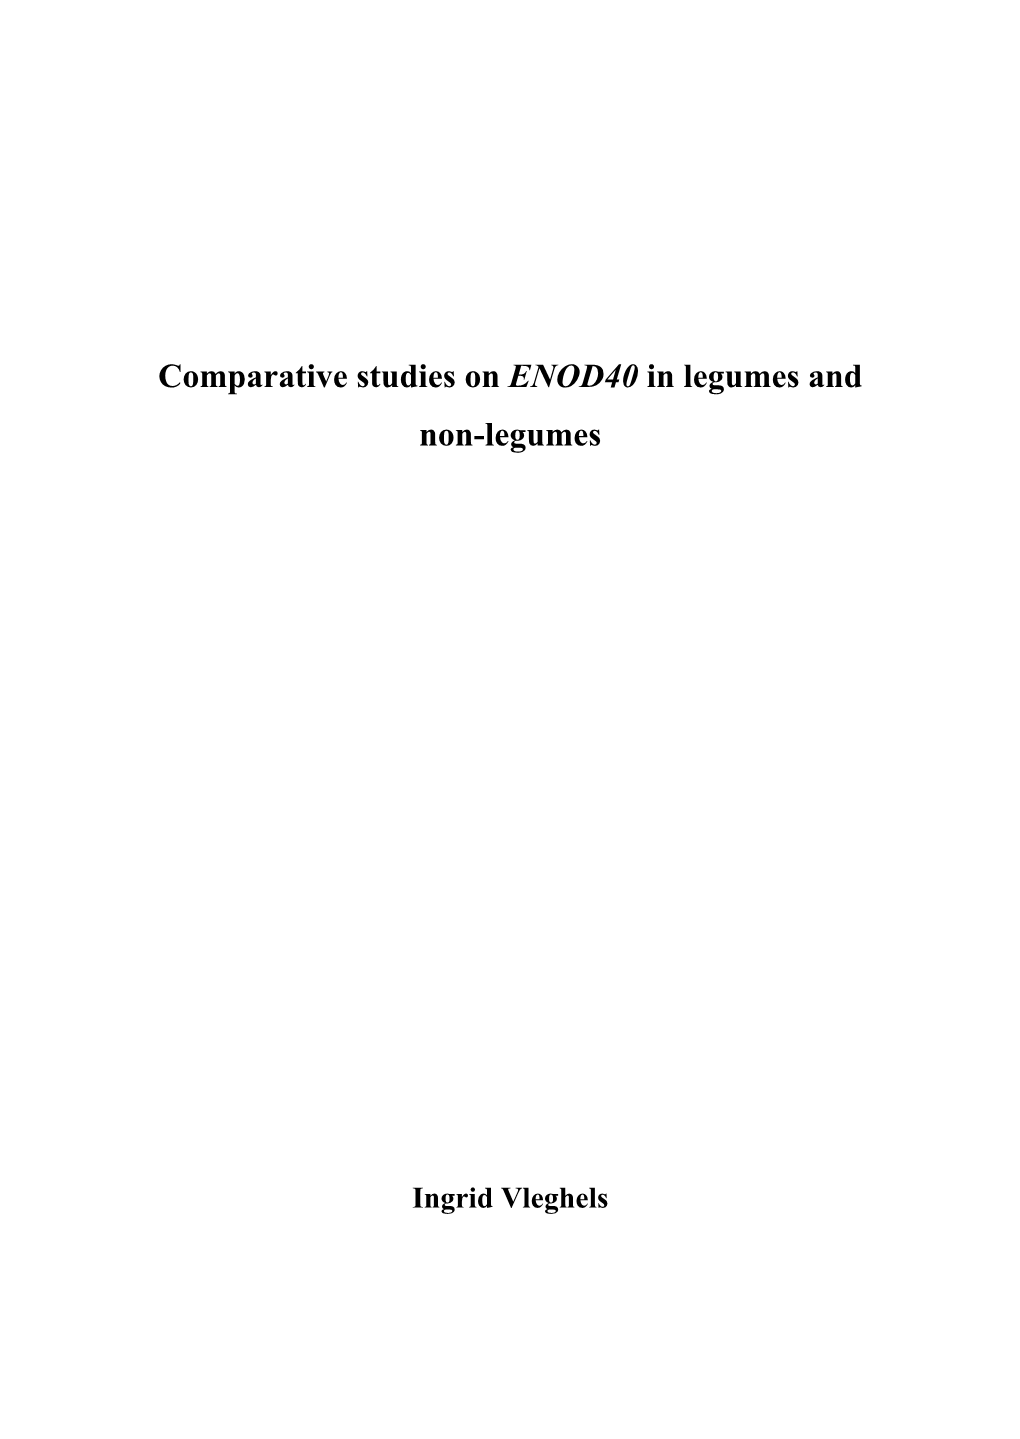 Comparative Studies on ENOD40 in Legumes and Non-Legumes